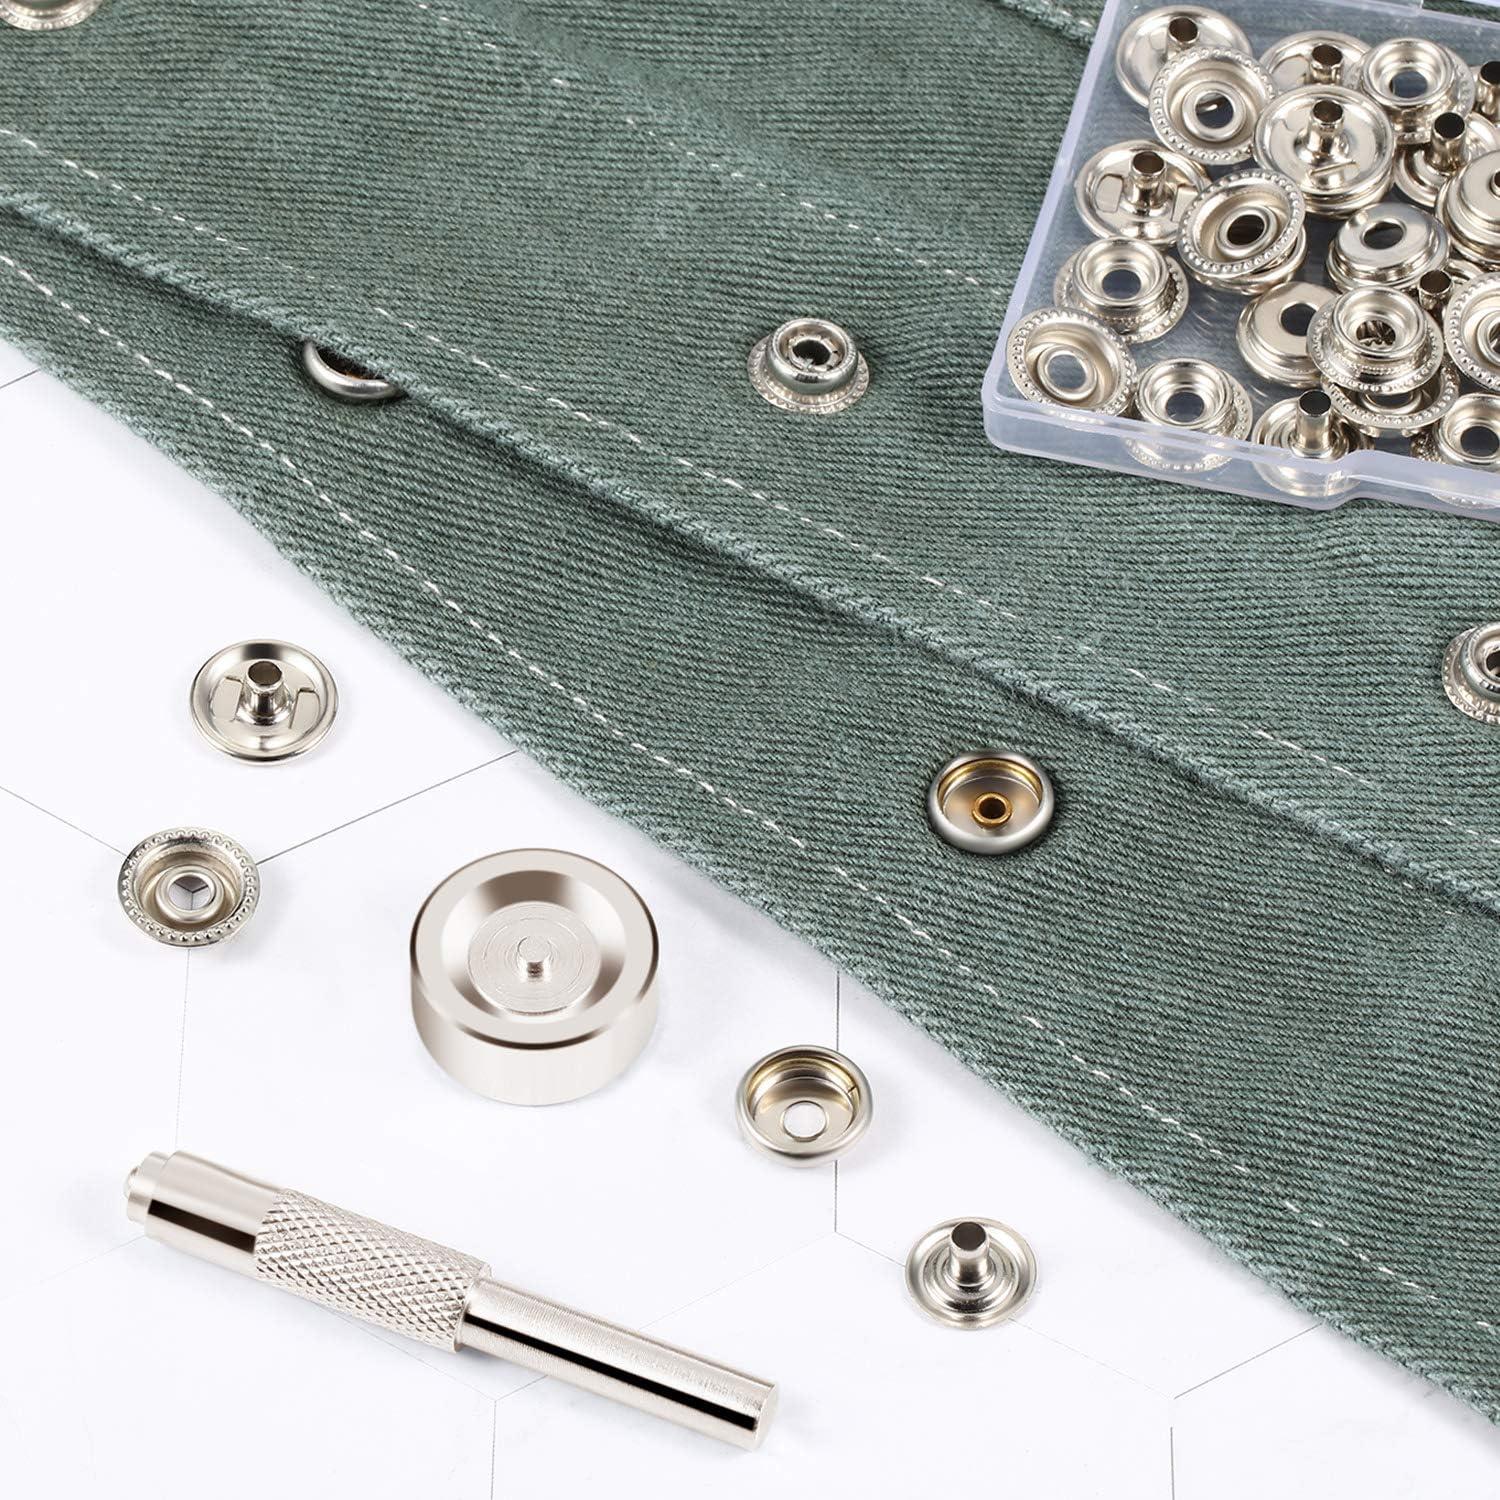 50 Sets Sew-on Snap Buttons, Metal Snaps Fasteners Kuwait